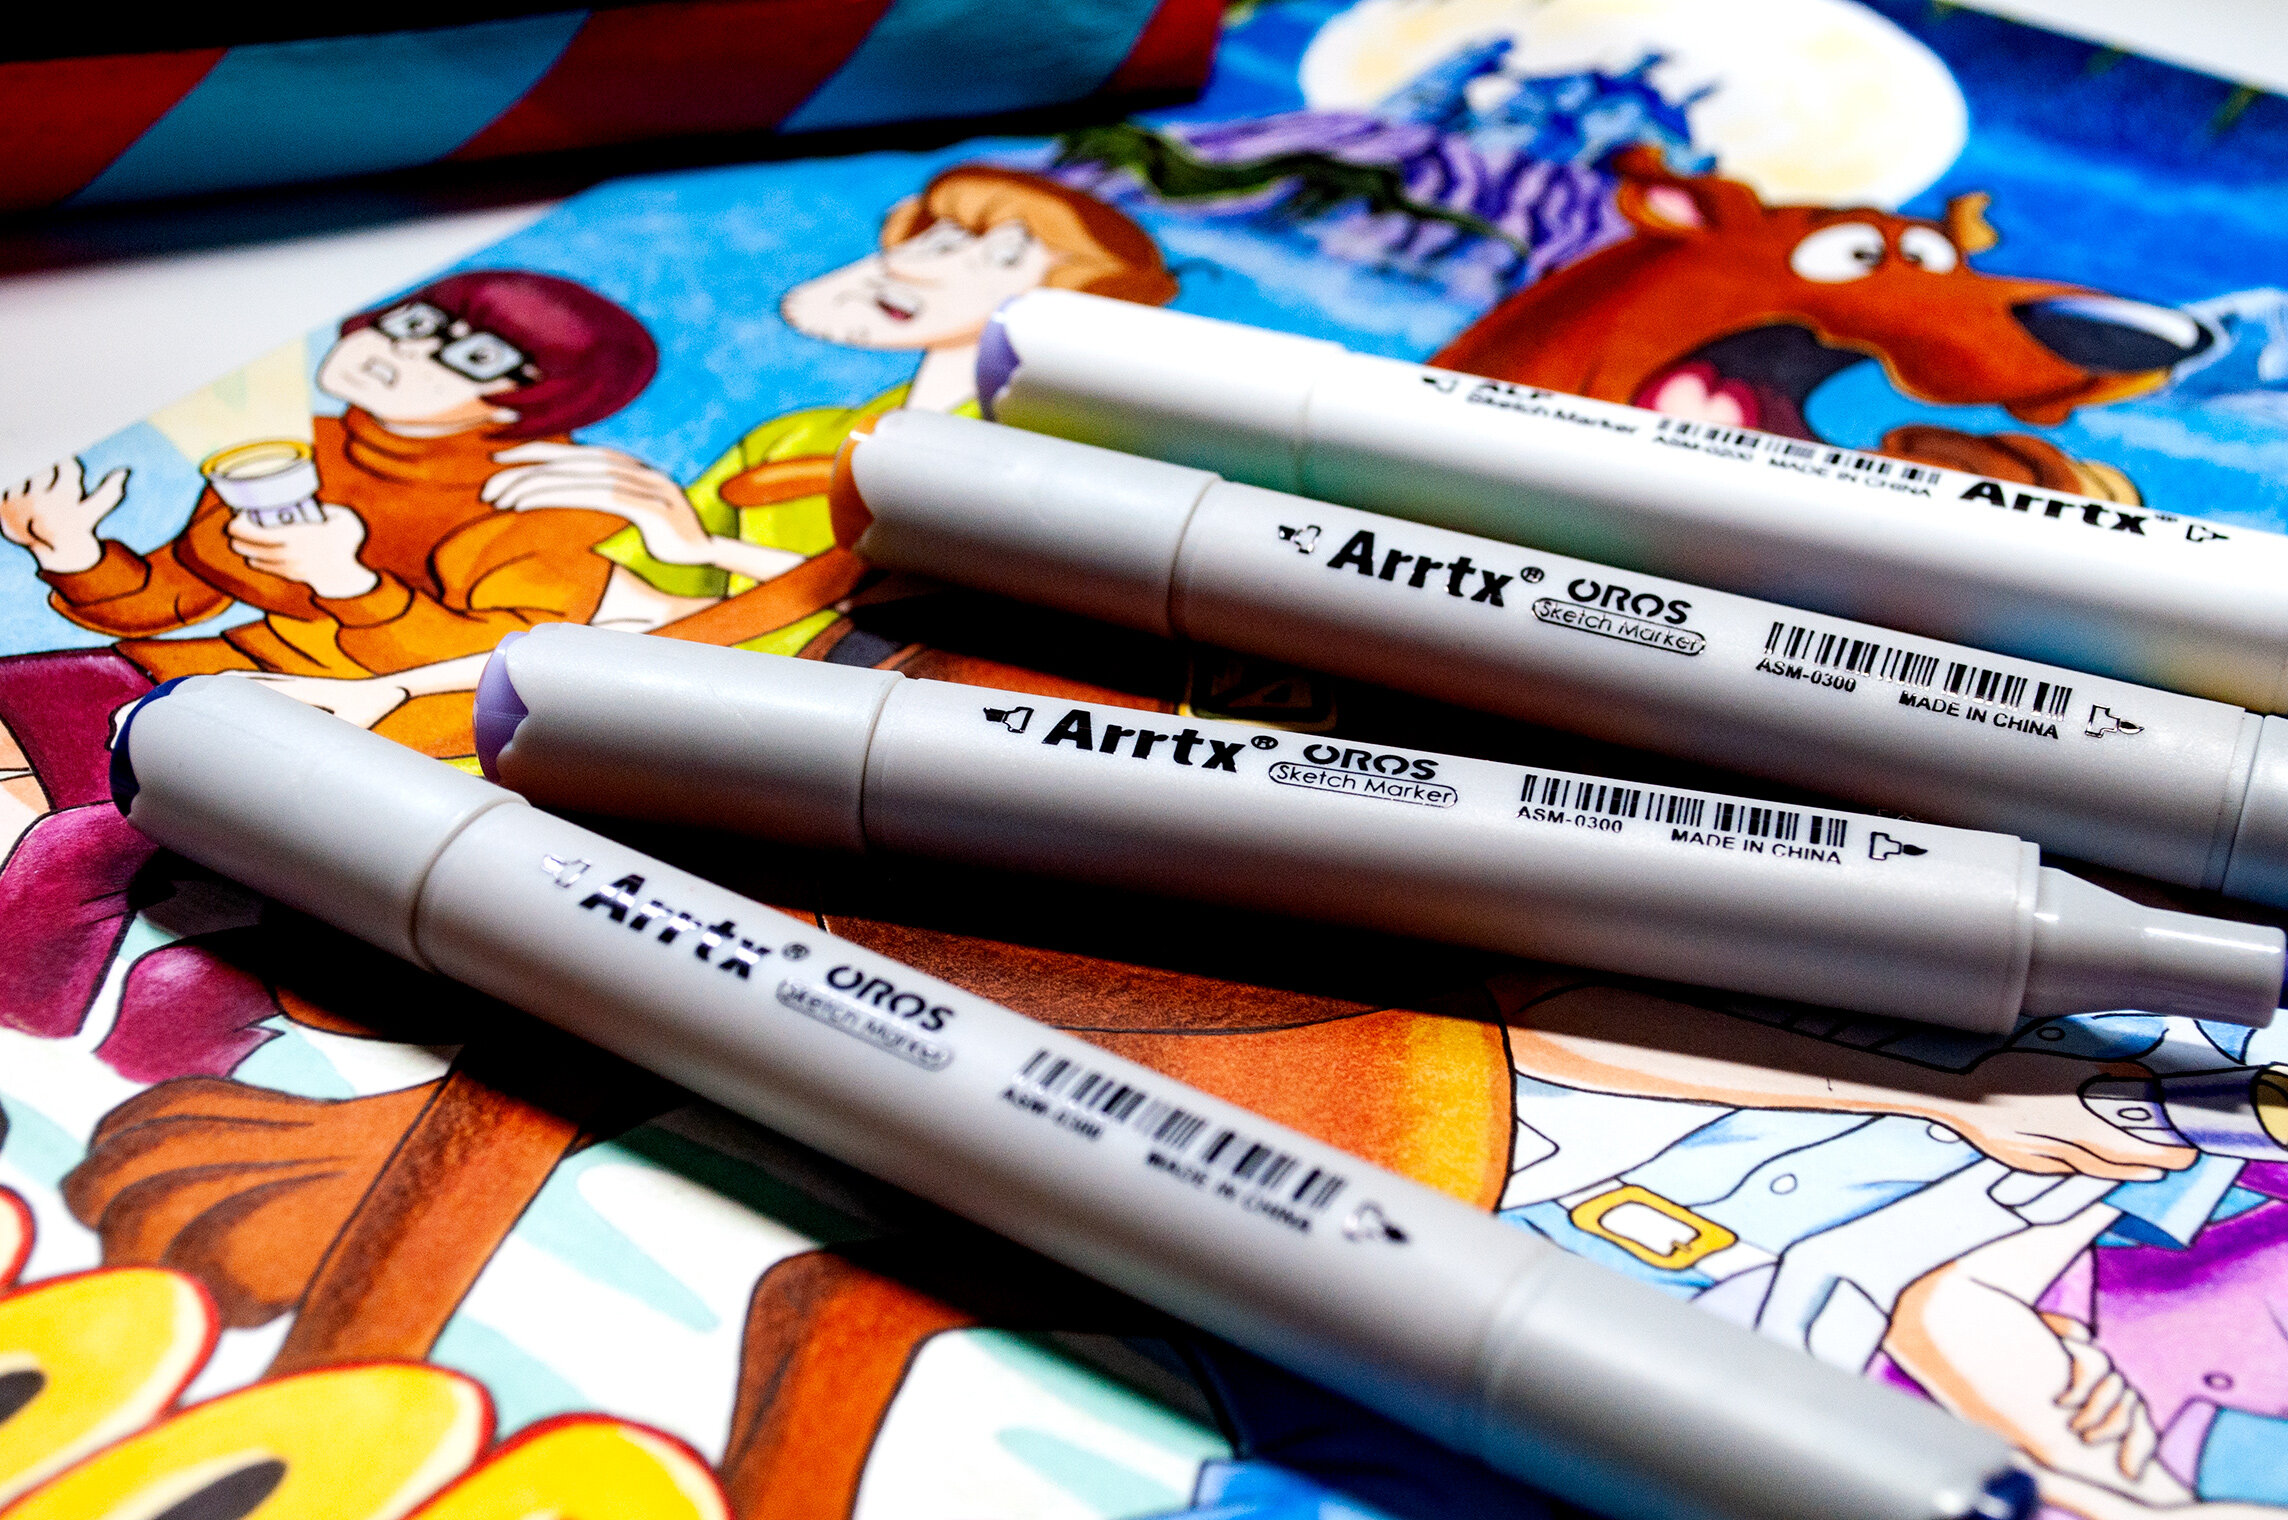 Arrtx Oros Markers - In-Depth Honest Review of the Best Cheap